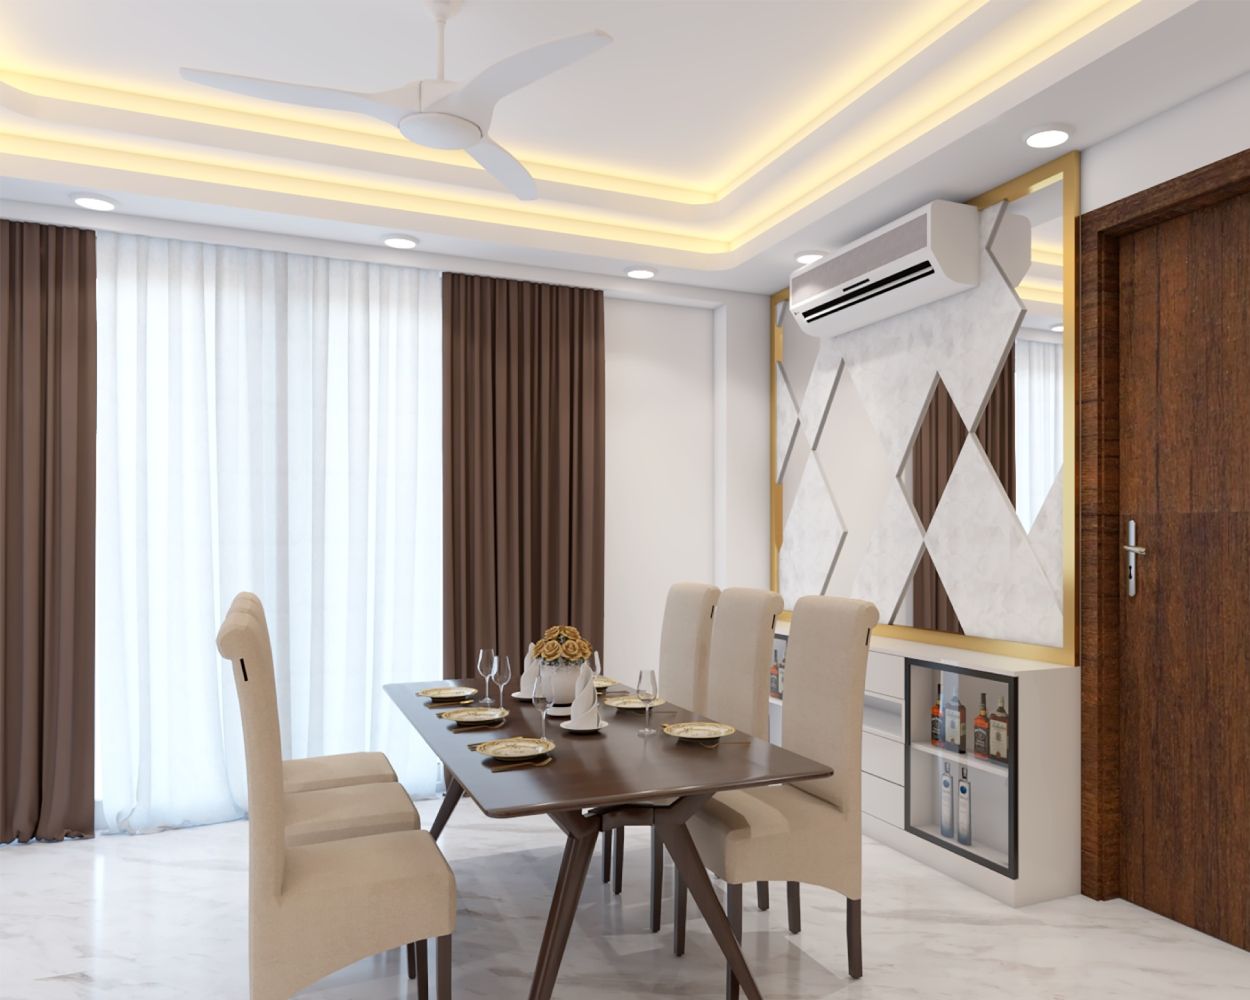 Classic Wood And Beige 6-Seater Dining Room Design With Mirrored Wall Panel